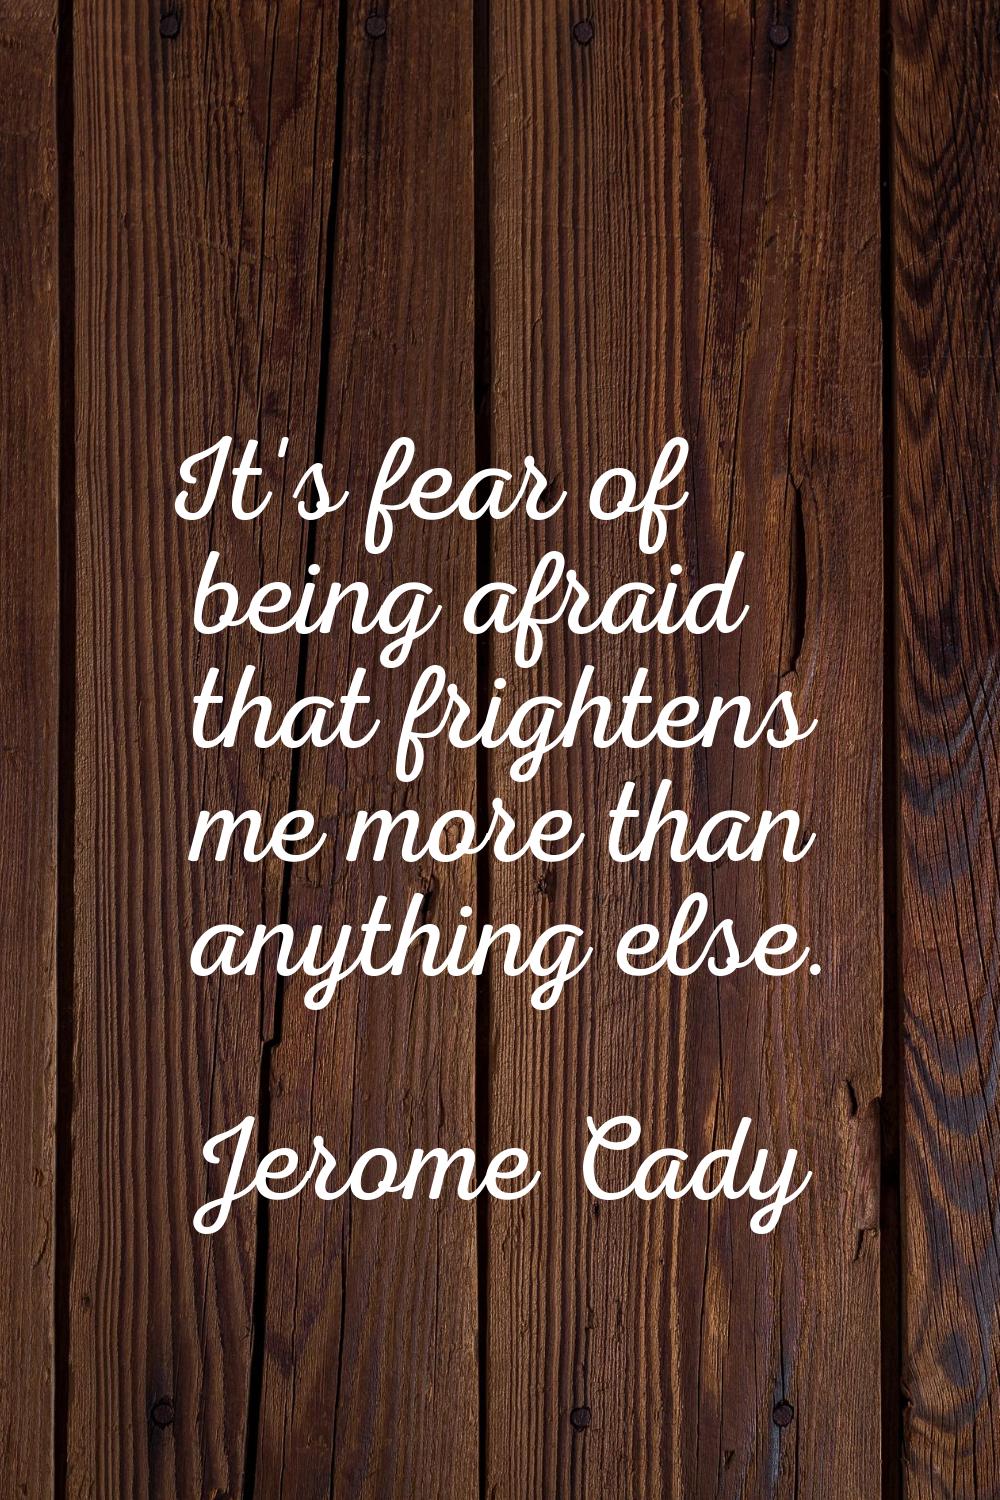 It's fear of being afraid that frightens me more than anything else.